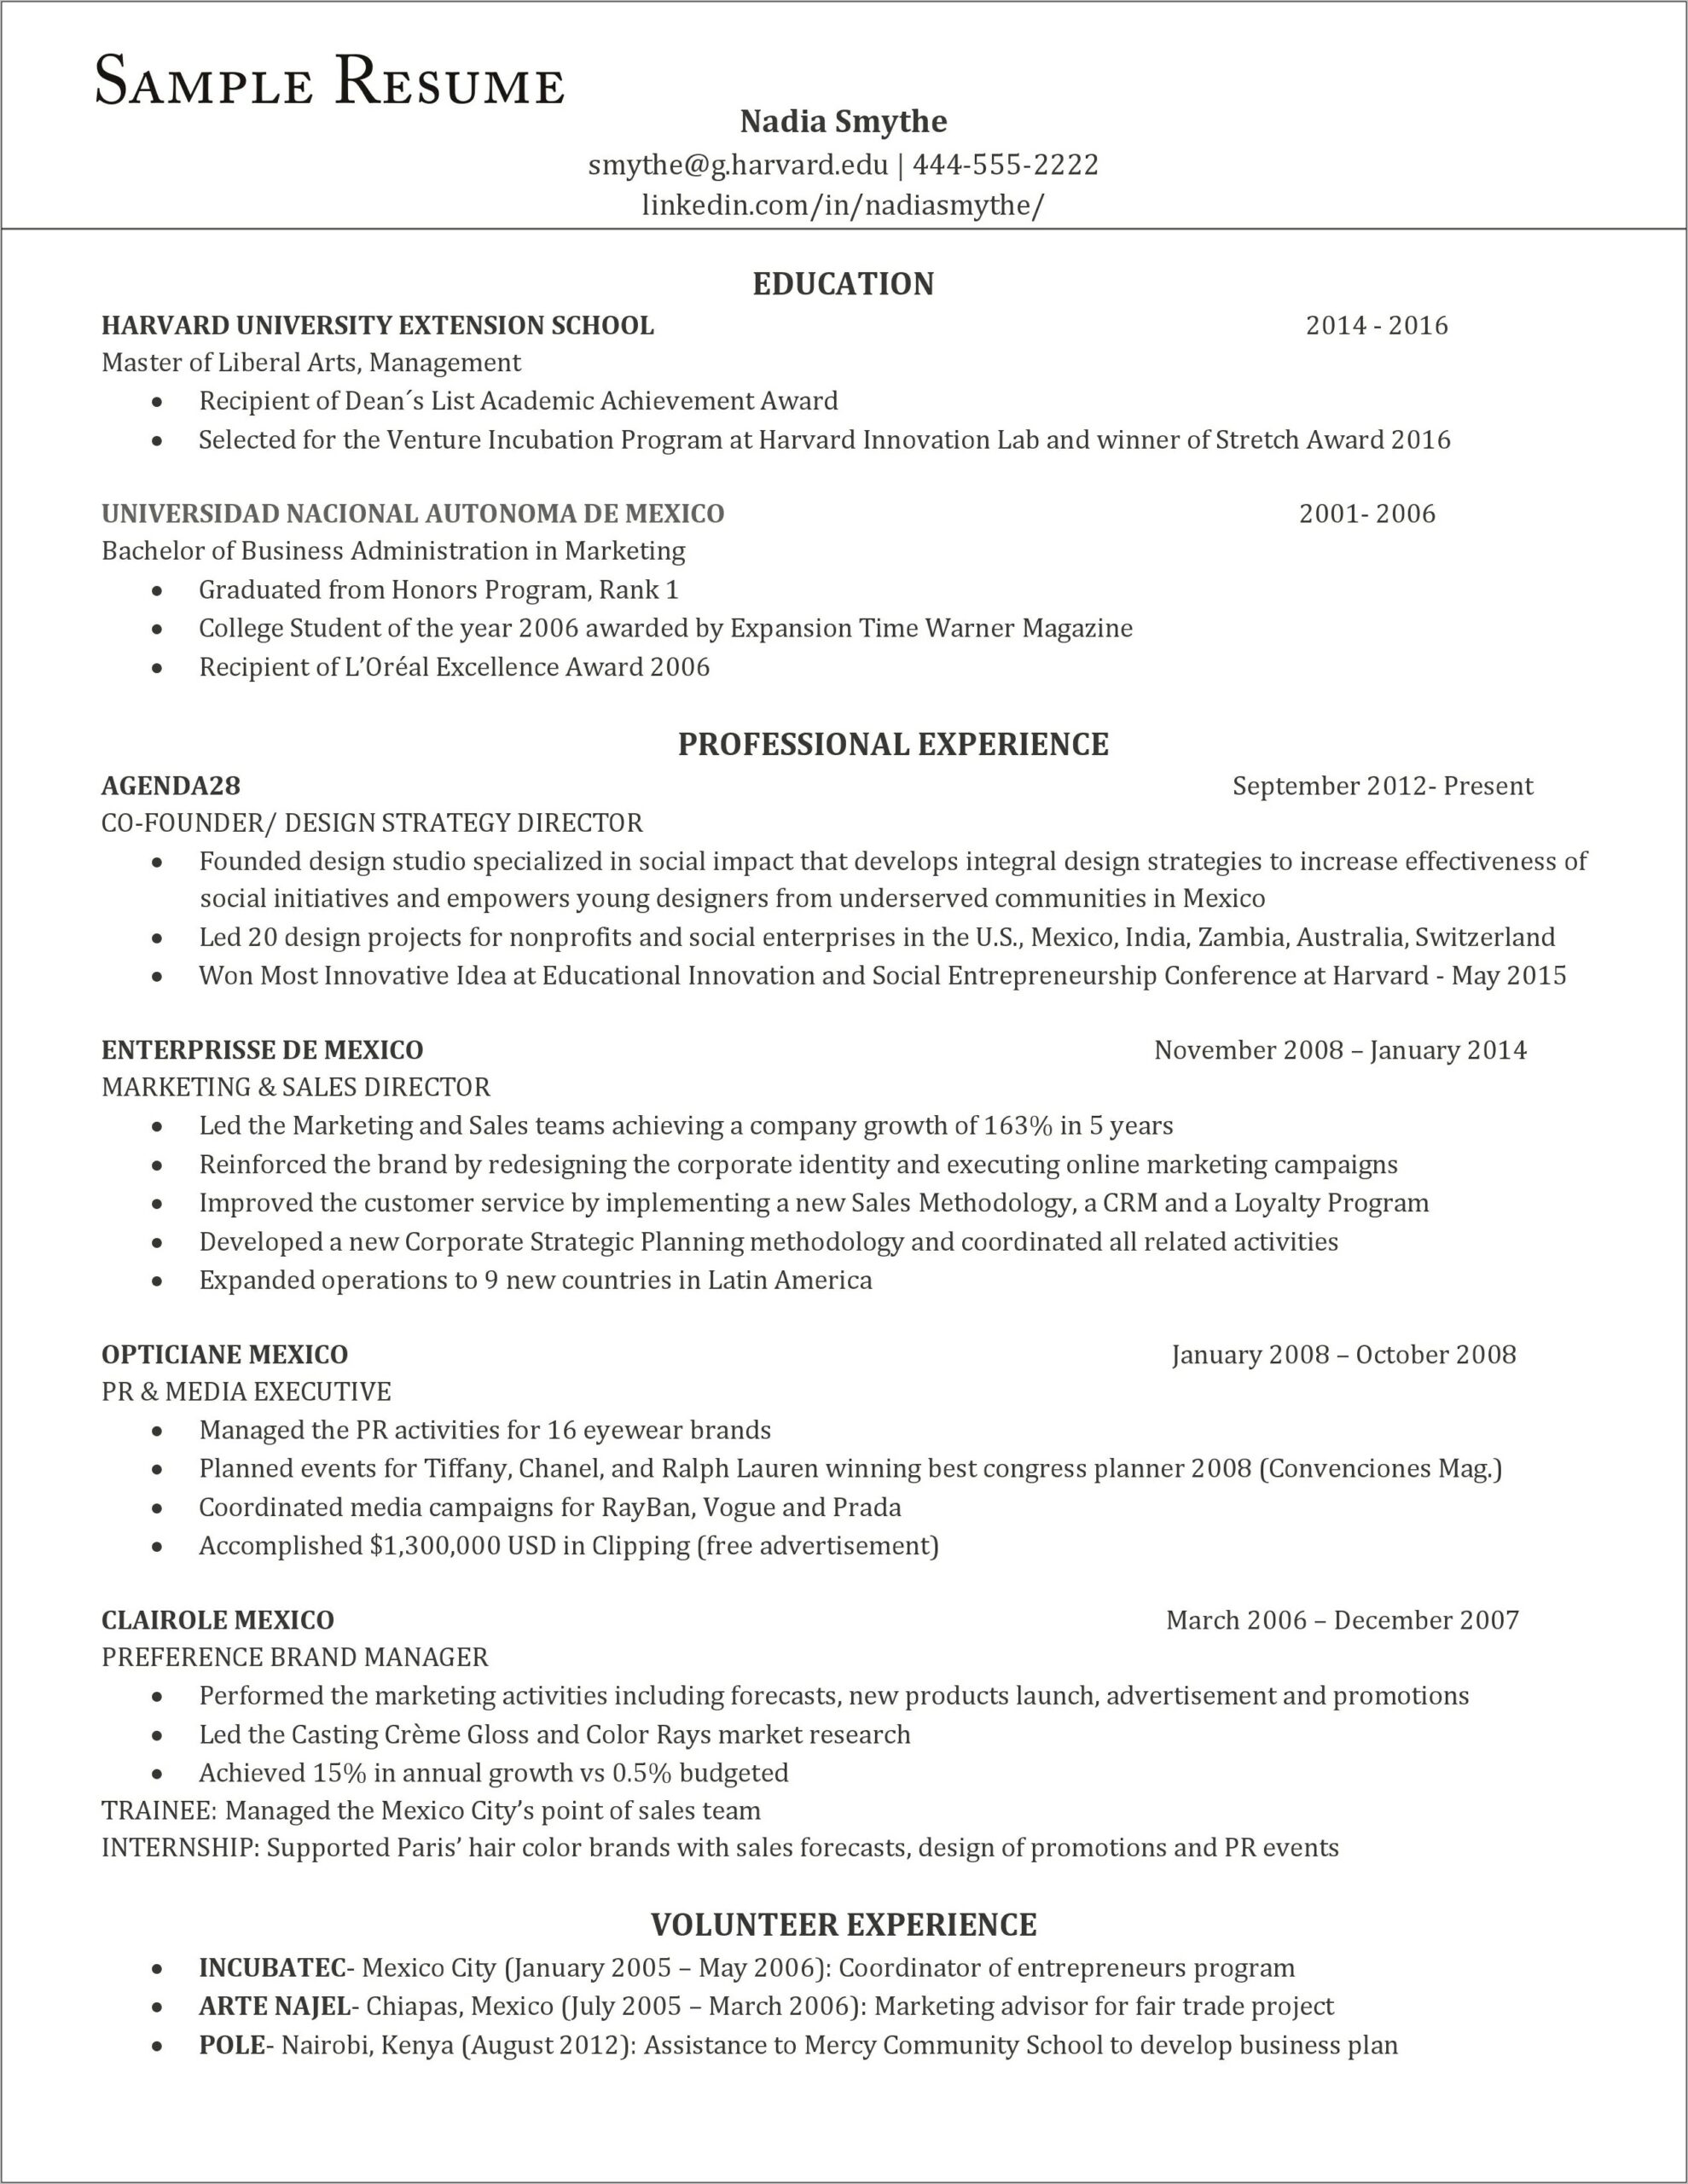 A Good Resume Objective For A College Student